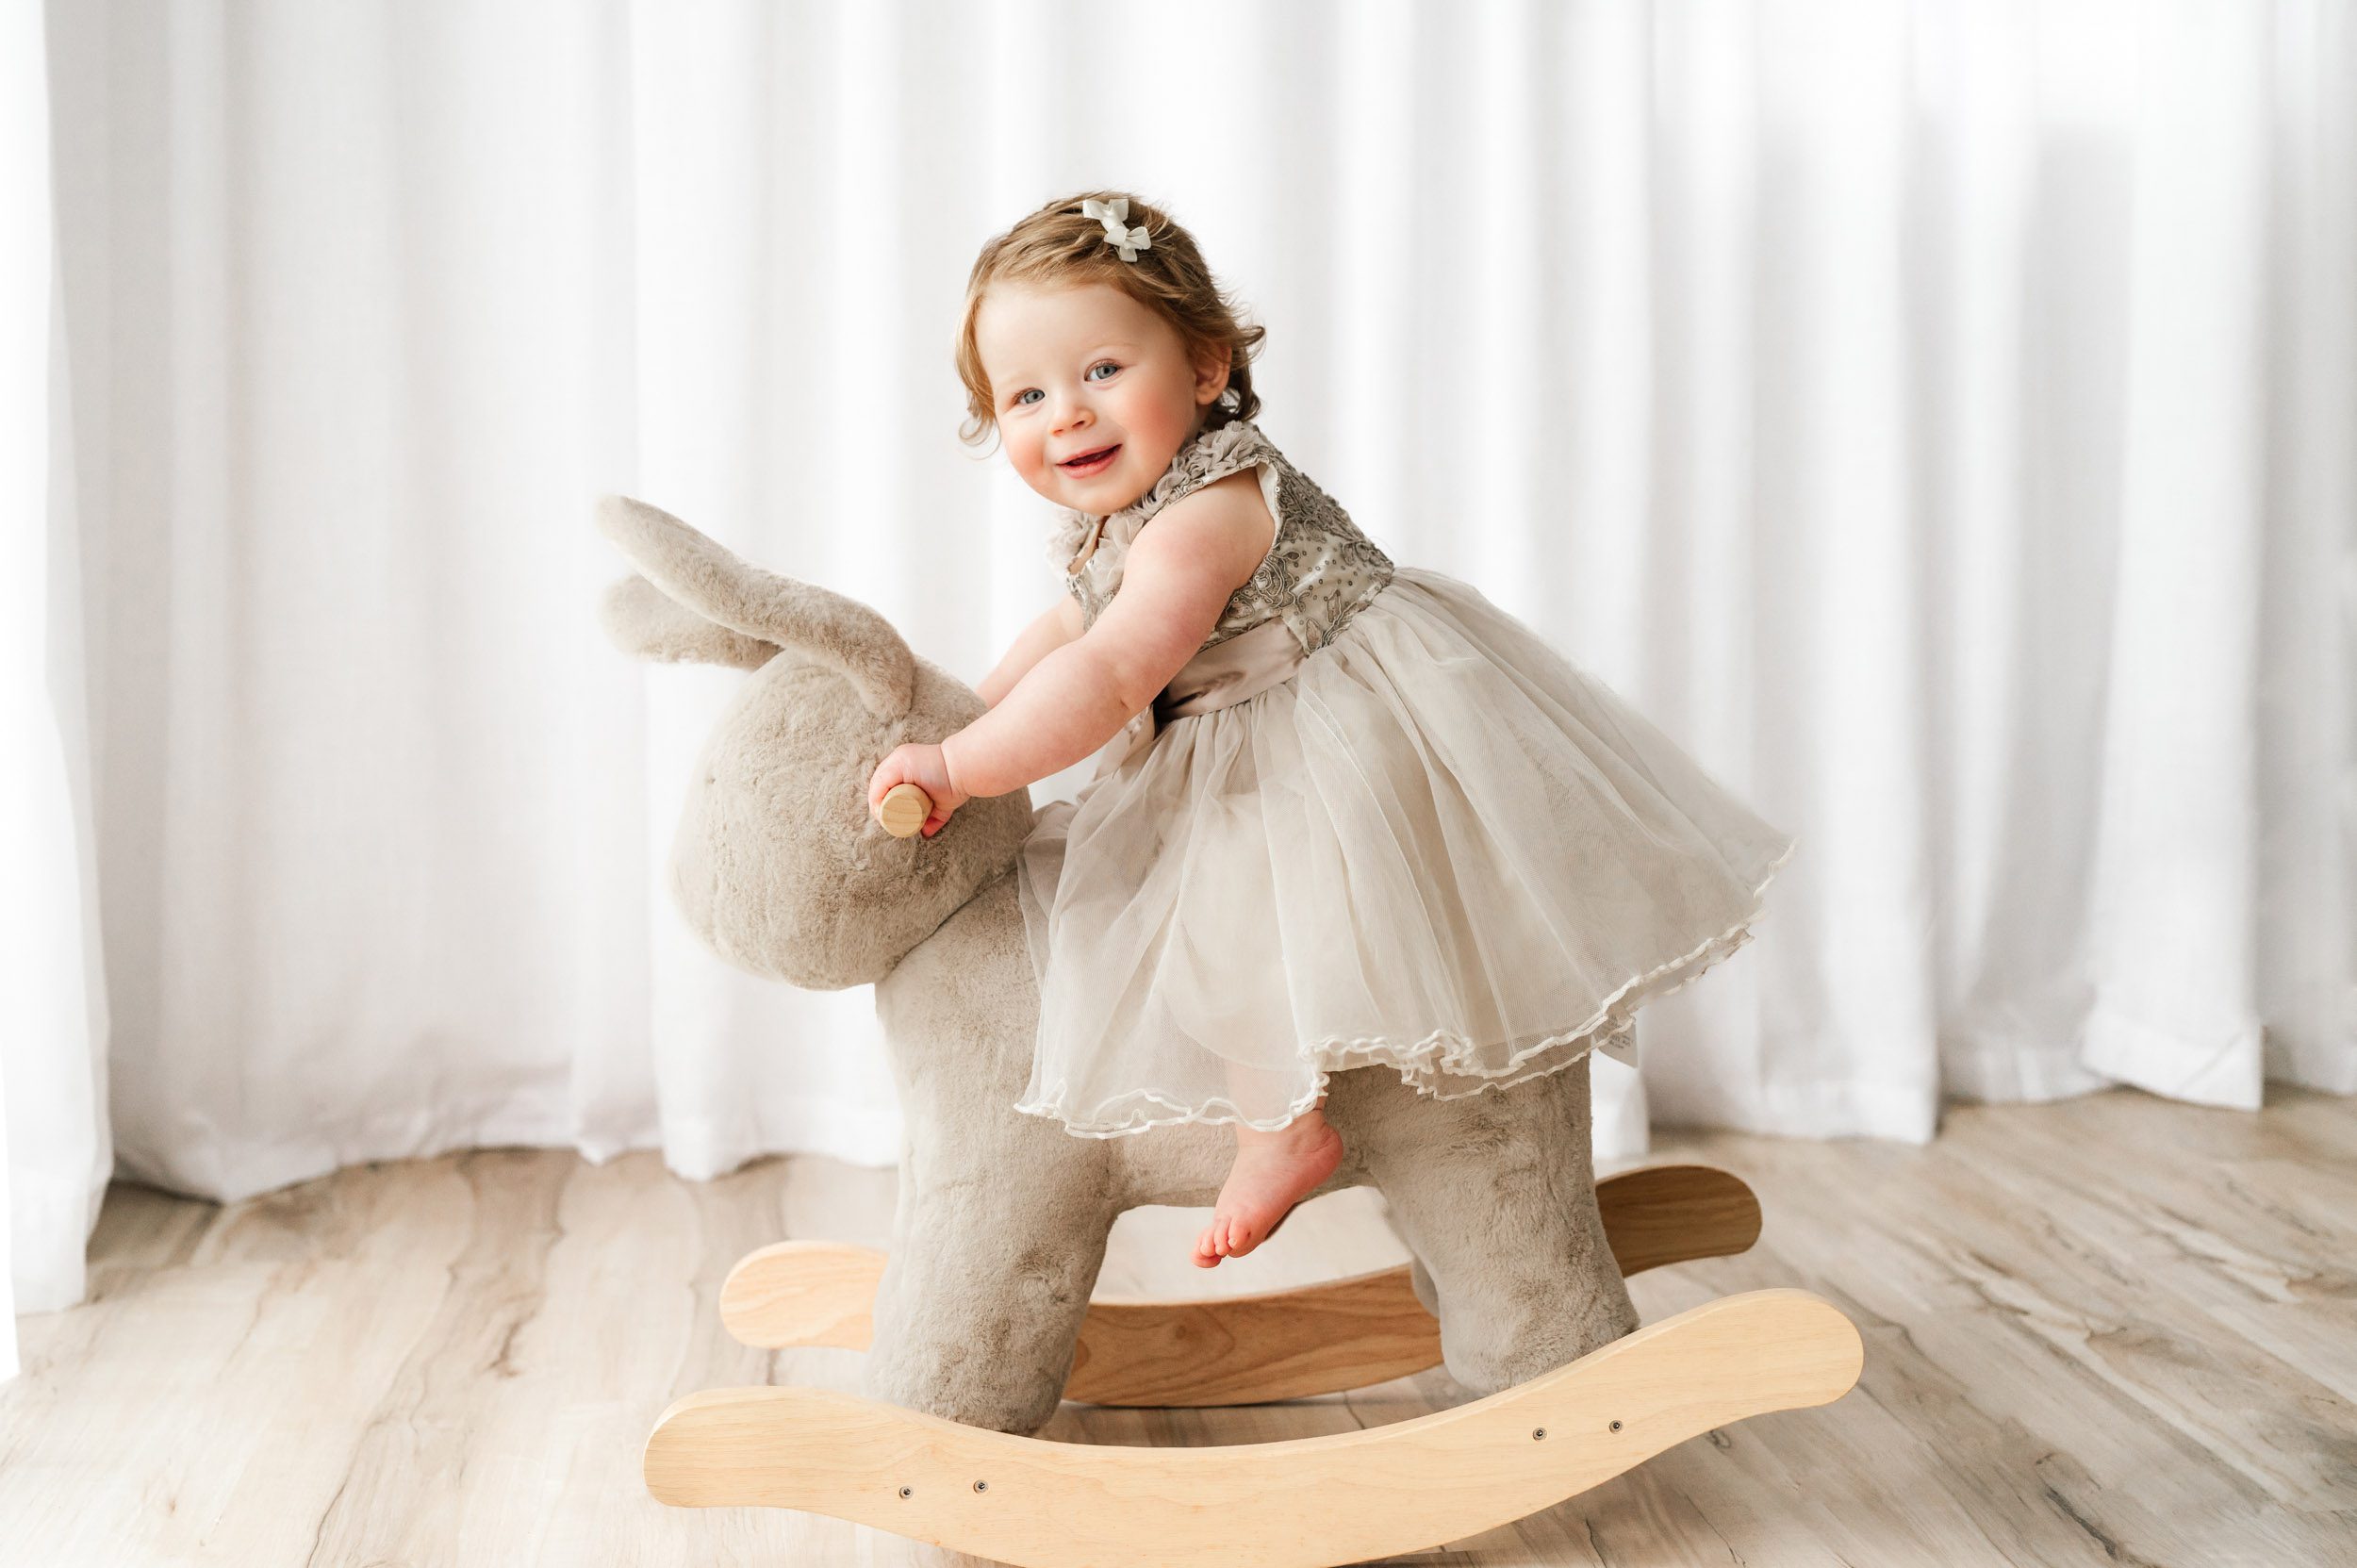 a young girl riding on a bunny rocker toy and laughing as she smiles at the camera during a toddler milestone photo session